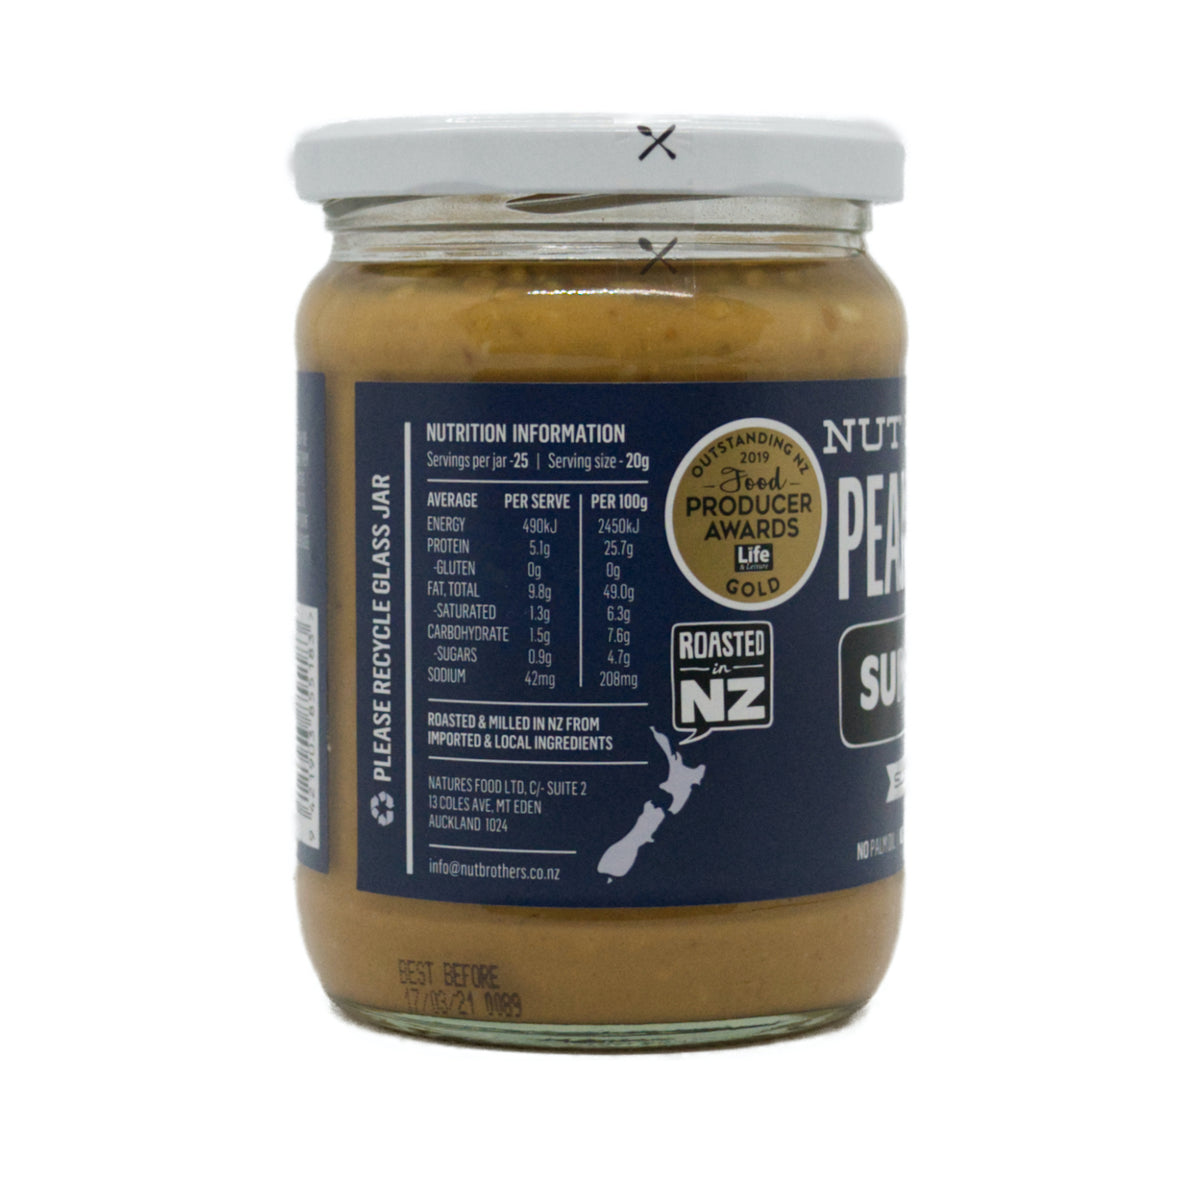 Nut Brothers Super Smooth Lightly Salted Peanut Butter 500g, Pantry